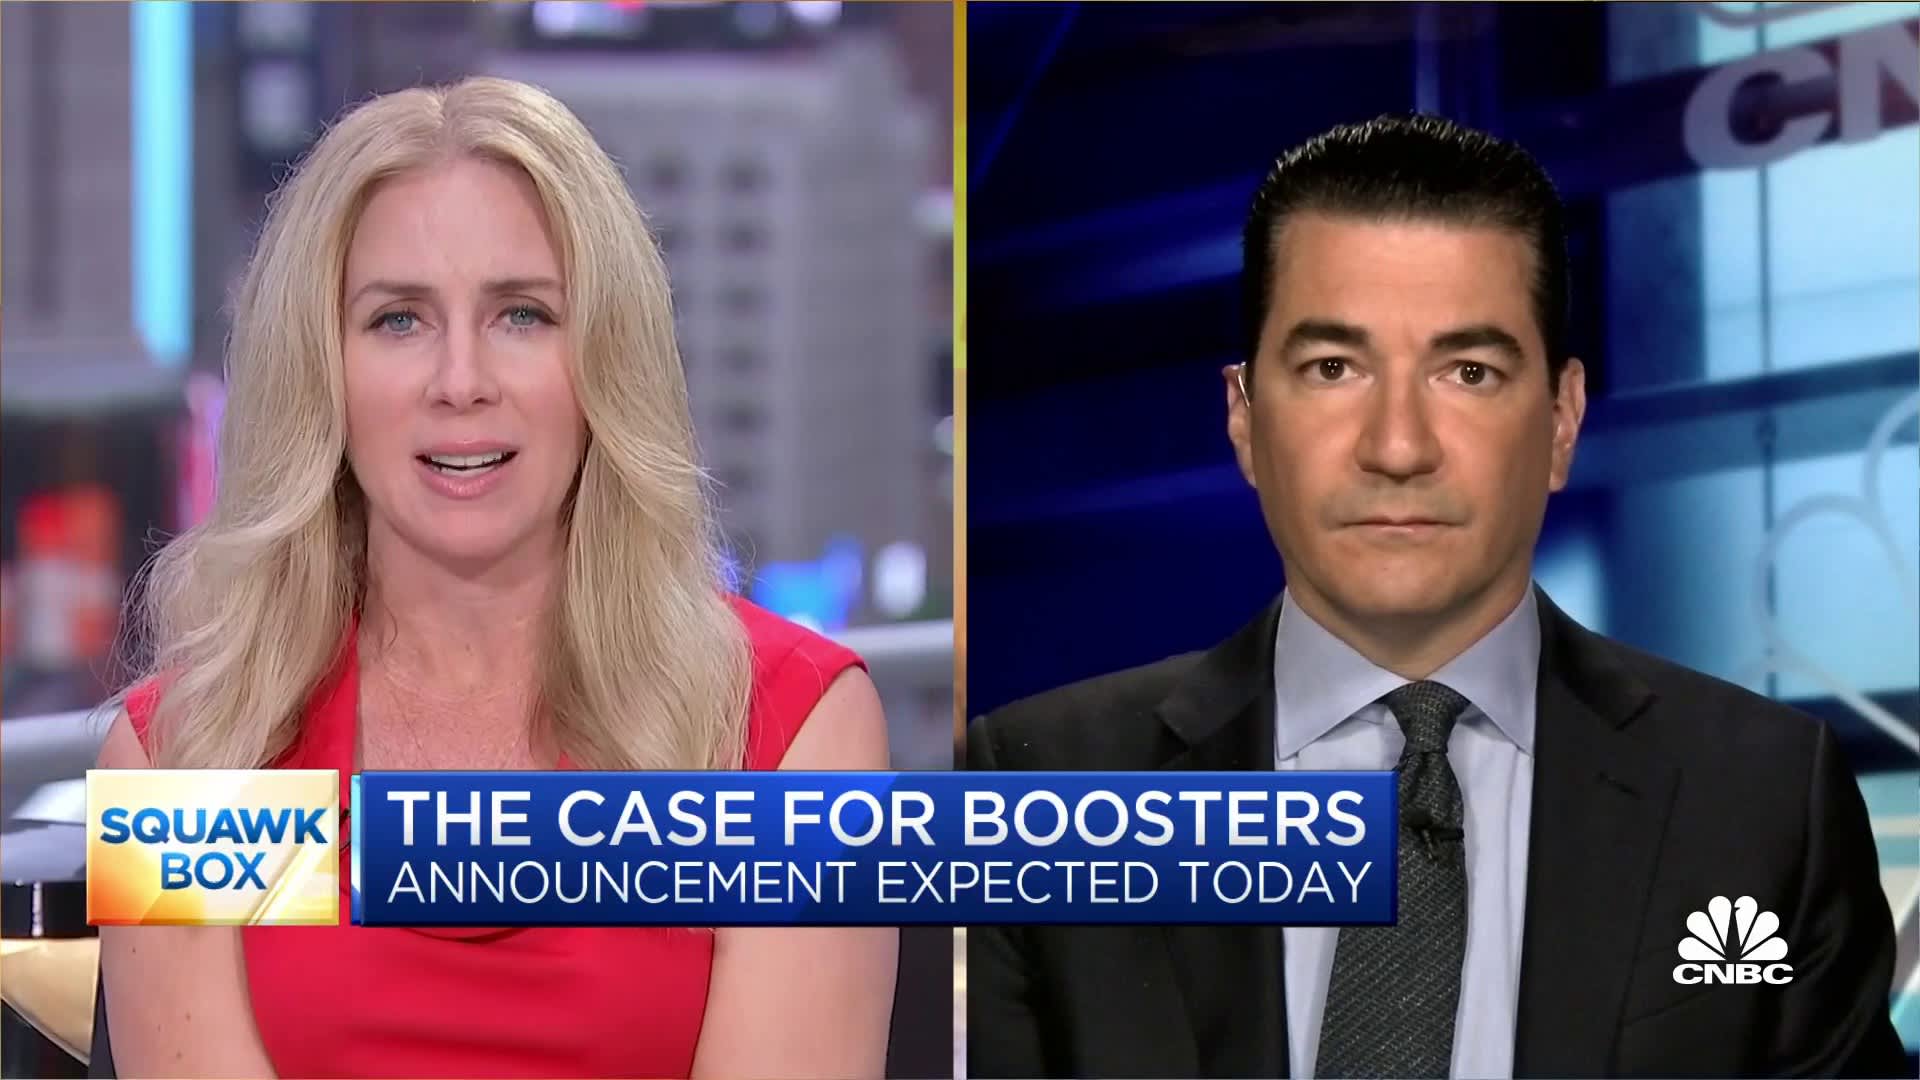 Dr. Scott Gottlieb on boosters: It’s good news the vaccines still cover variants